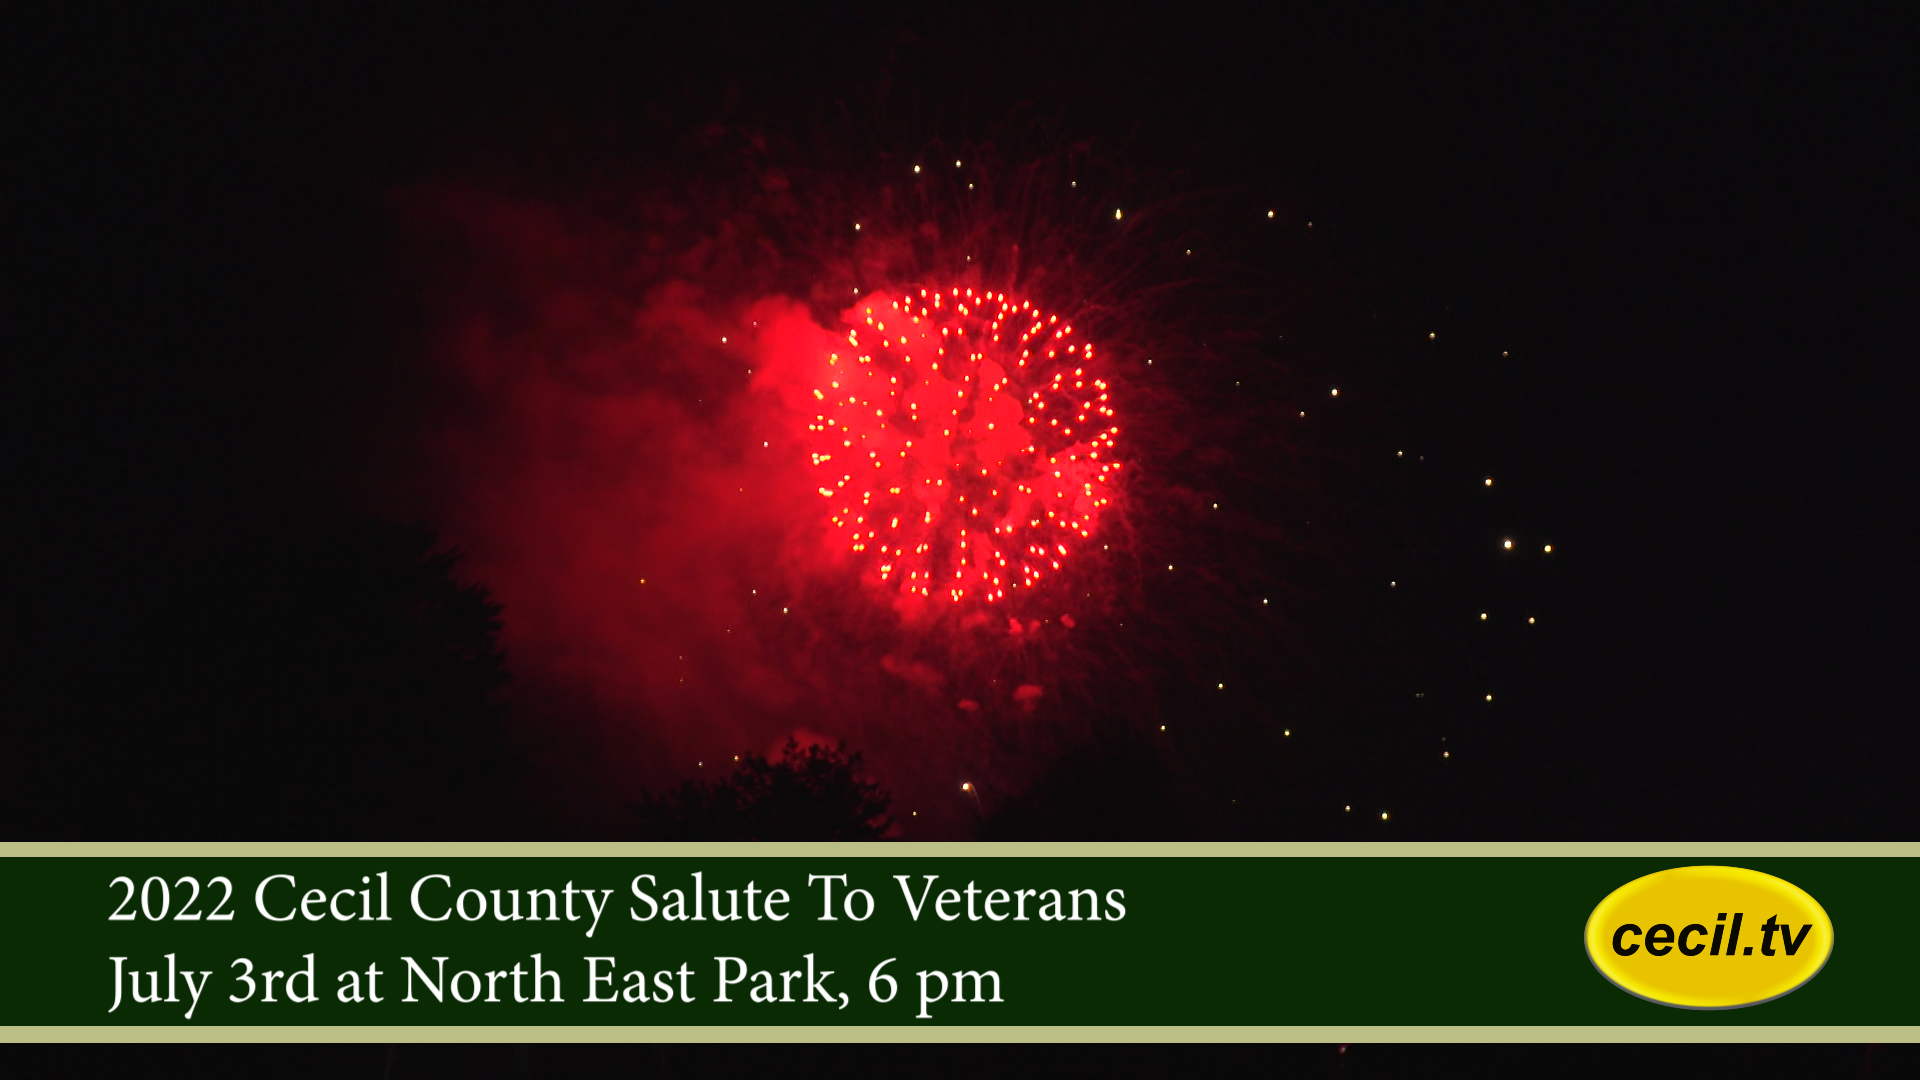 2022 Cecil County Salute To Veterans: July 3, 2022 - 6 pm